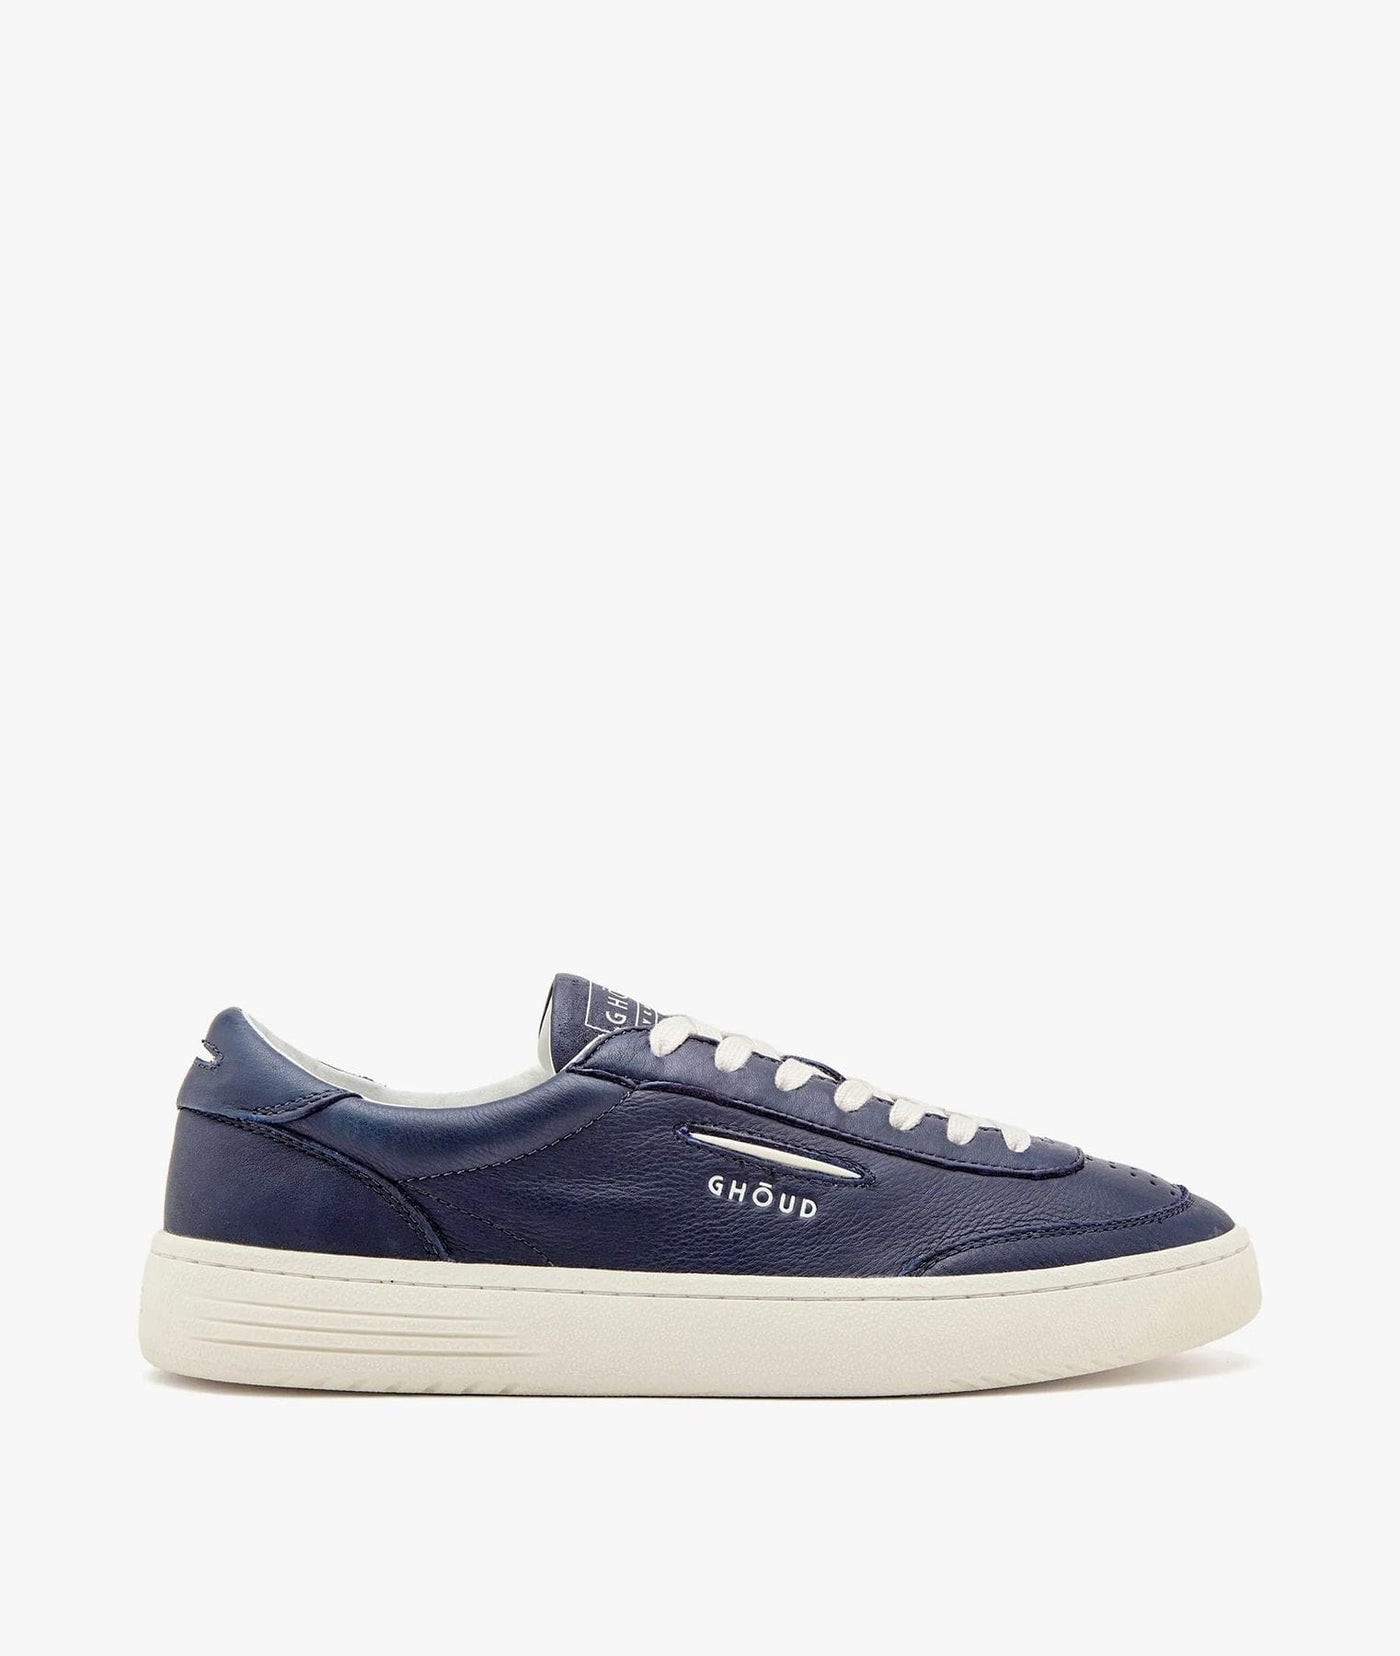 Ghoud Lido Low Man Egypt Leather Blue